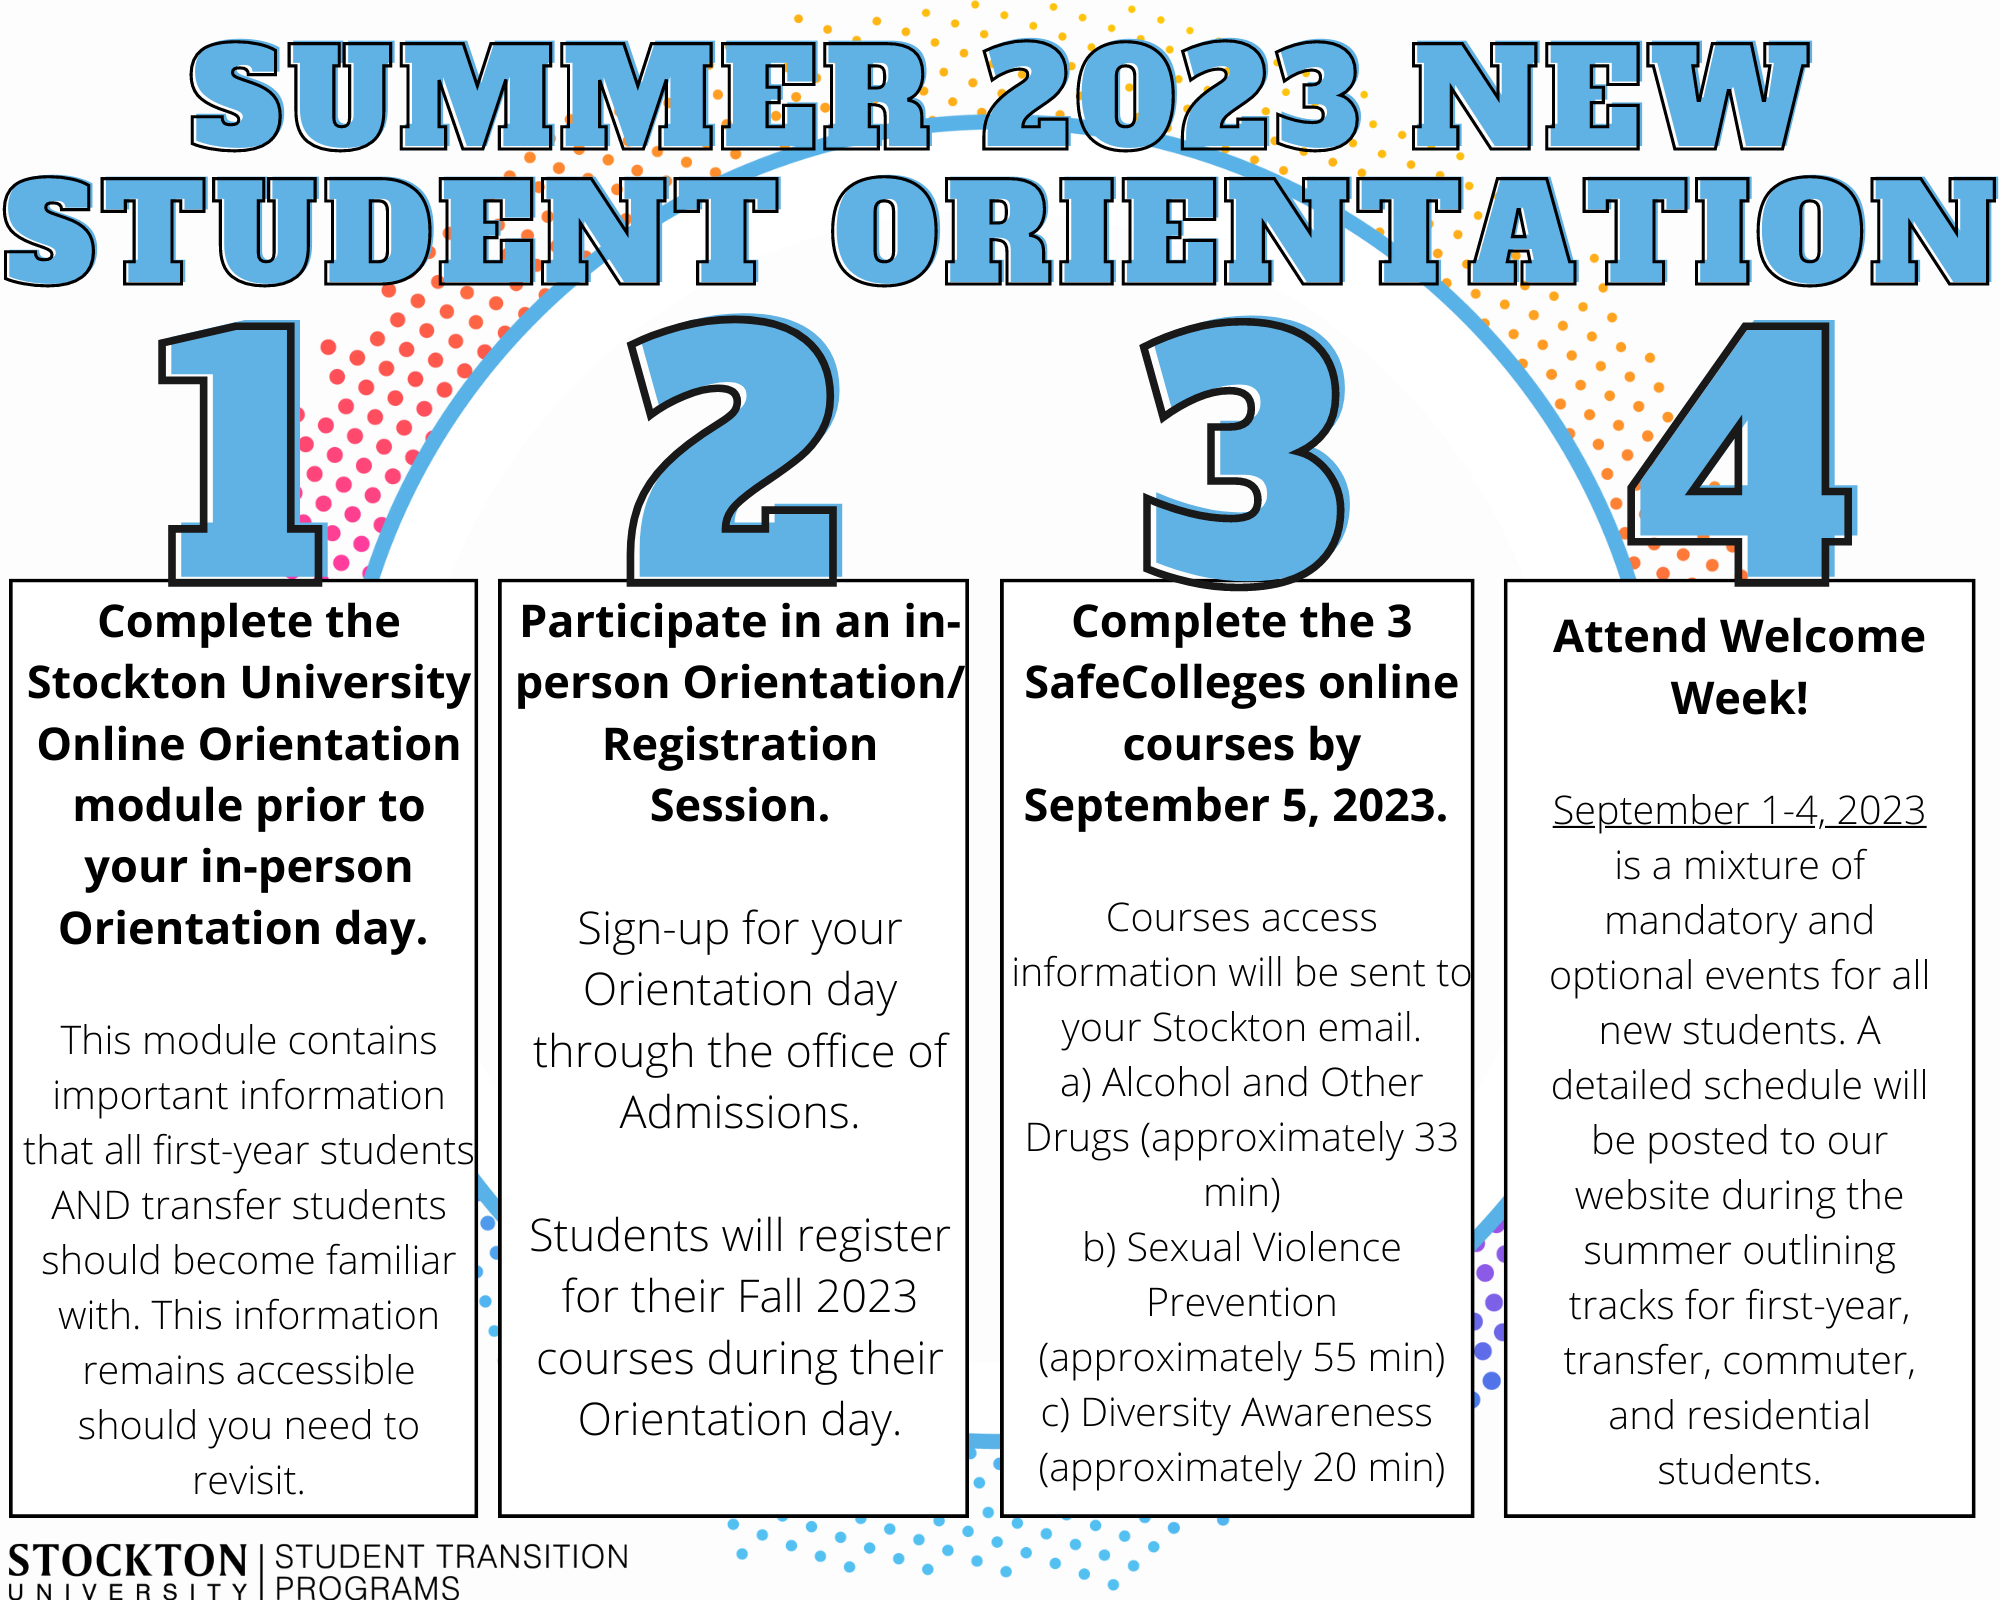 New Student Orientation 2023: 4 Steps to take before beginning your first semester at Stockton.